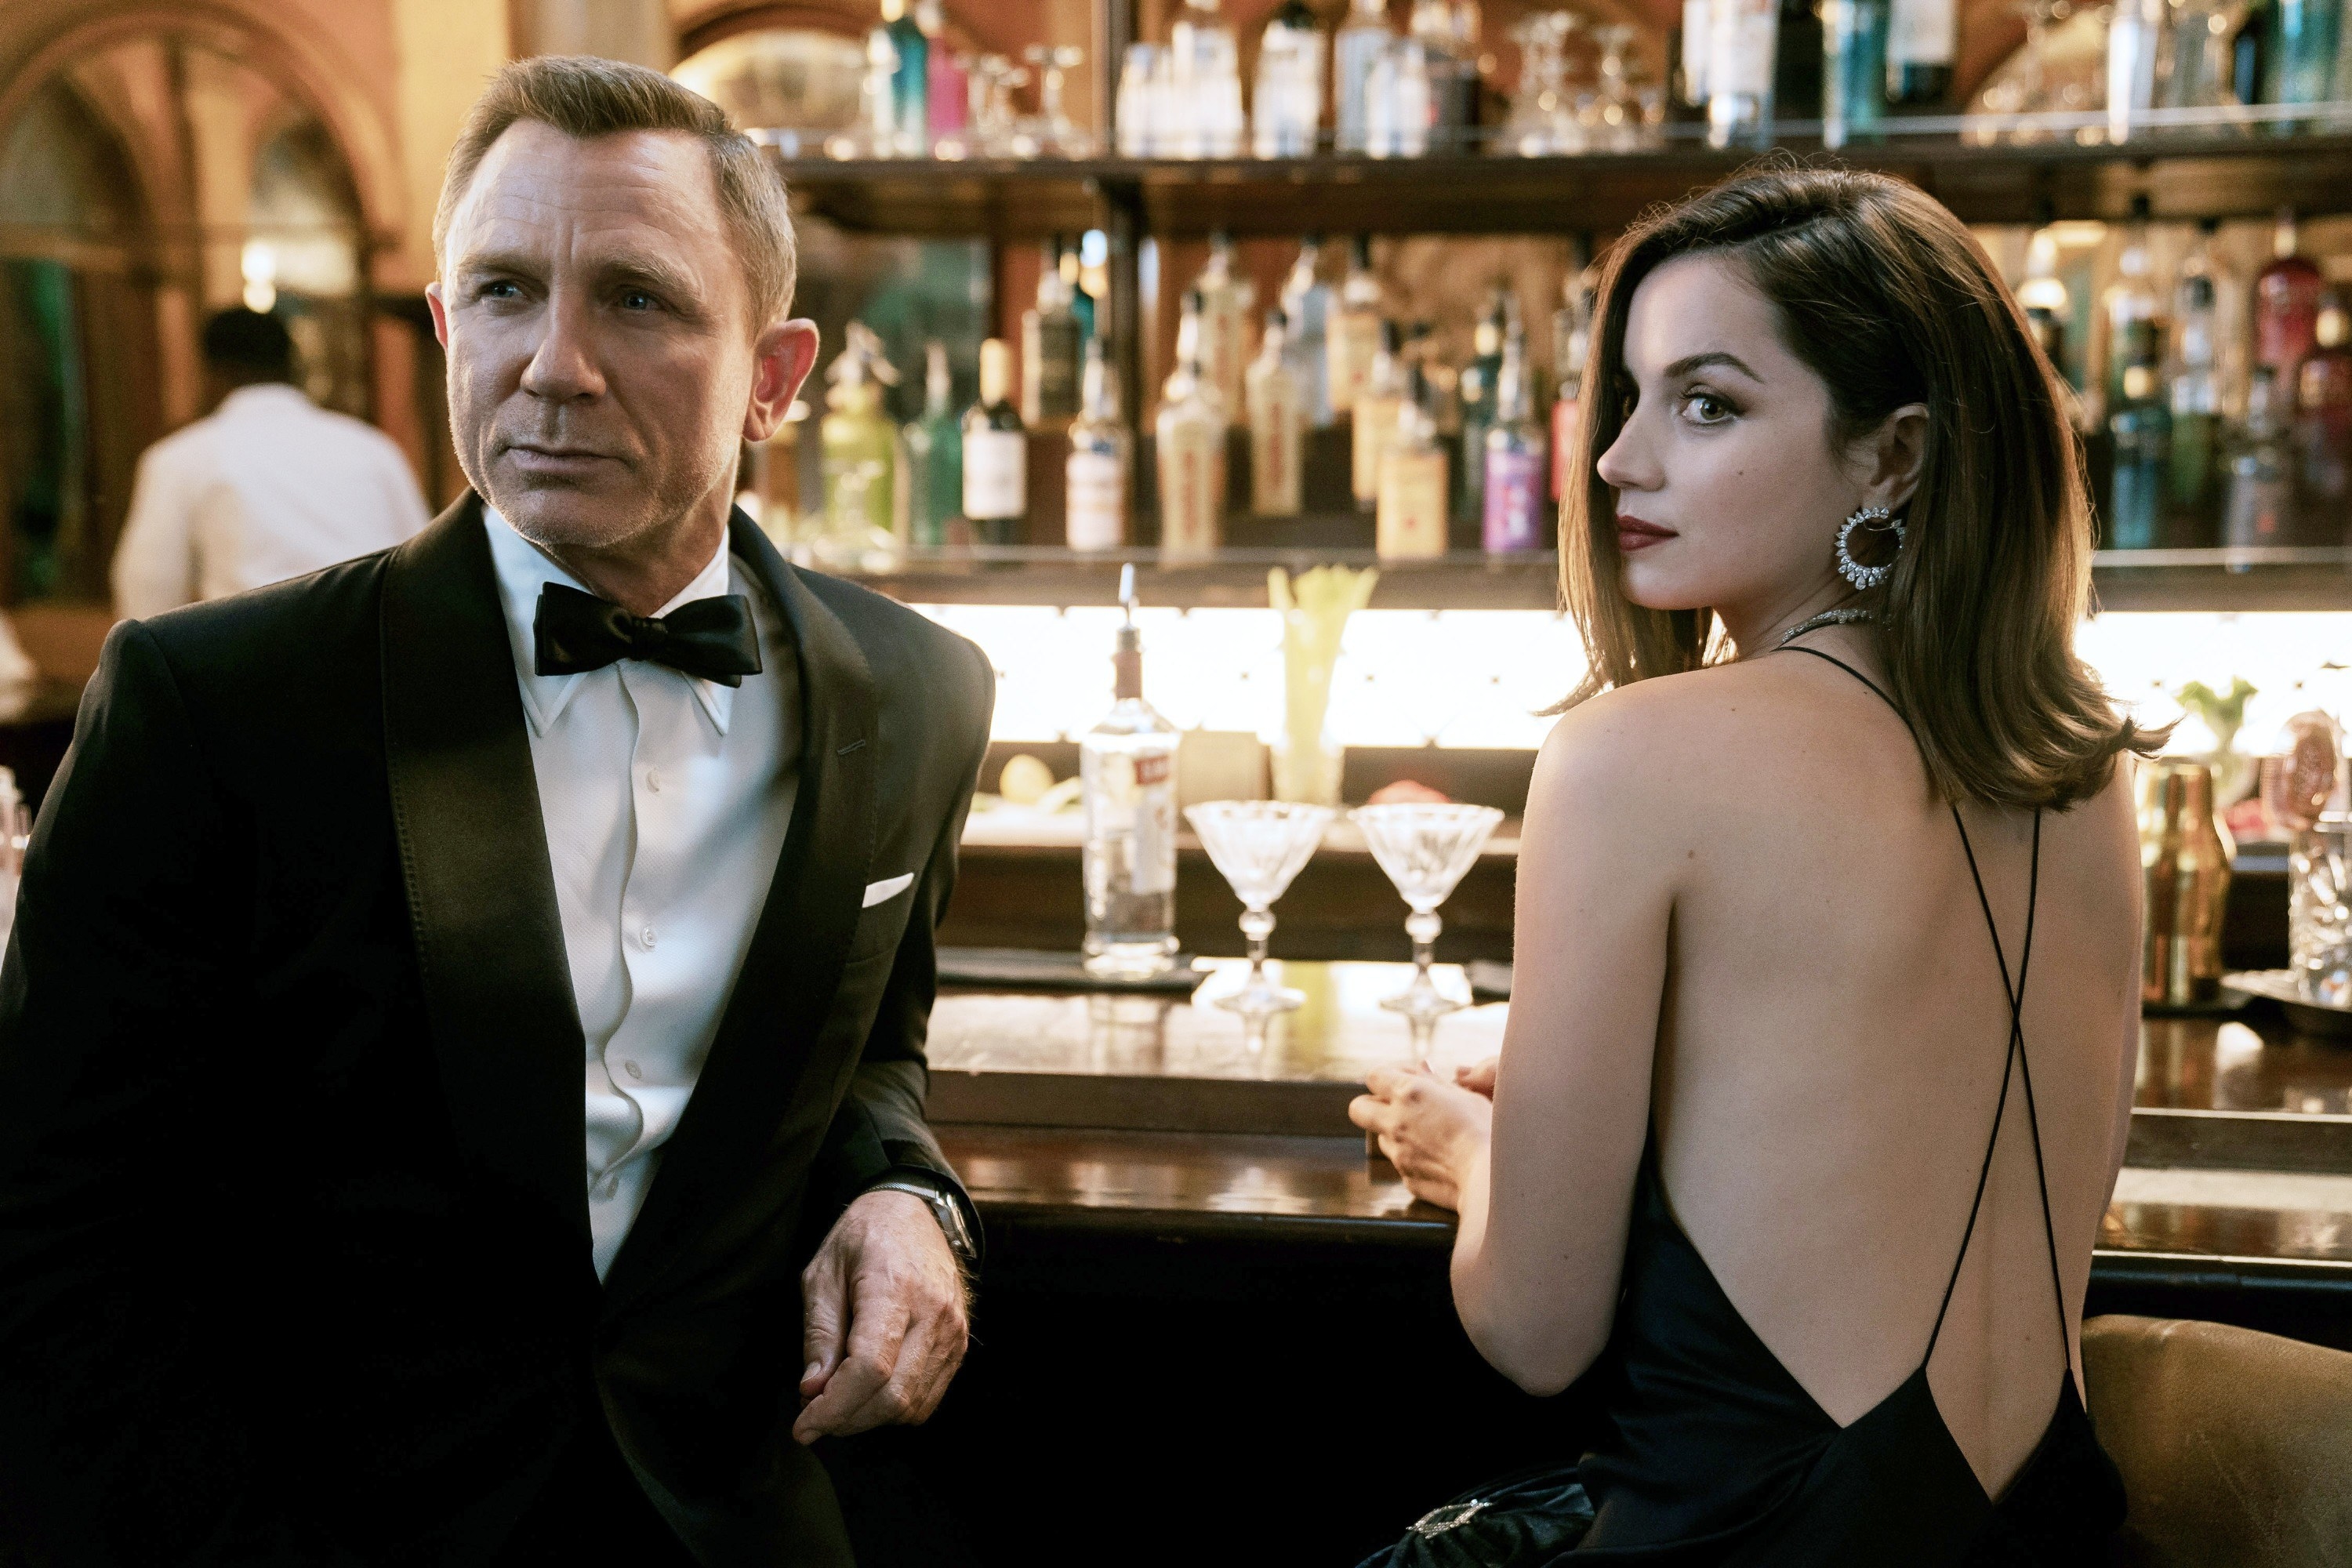 Daniel a Bond in a tuxedo standing at the bar with Ana de Armas as Paloma wearing a backless outfit in No Time to Die